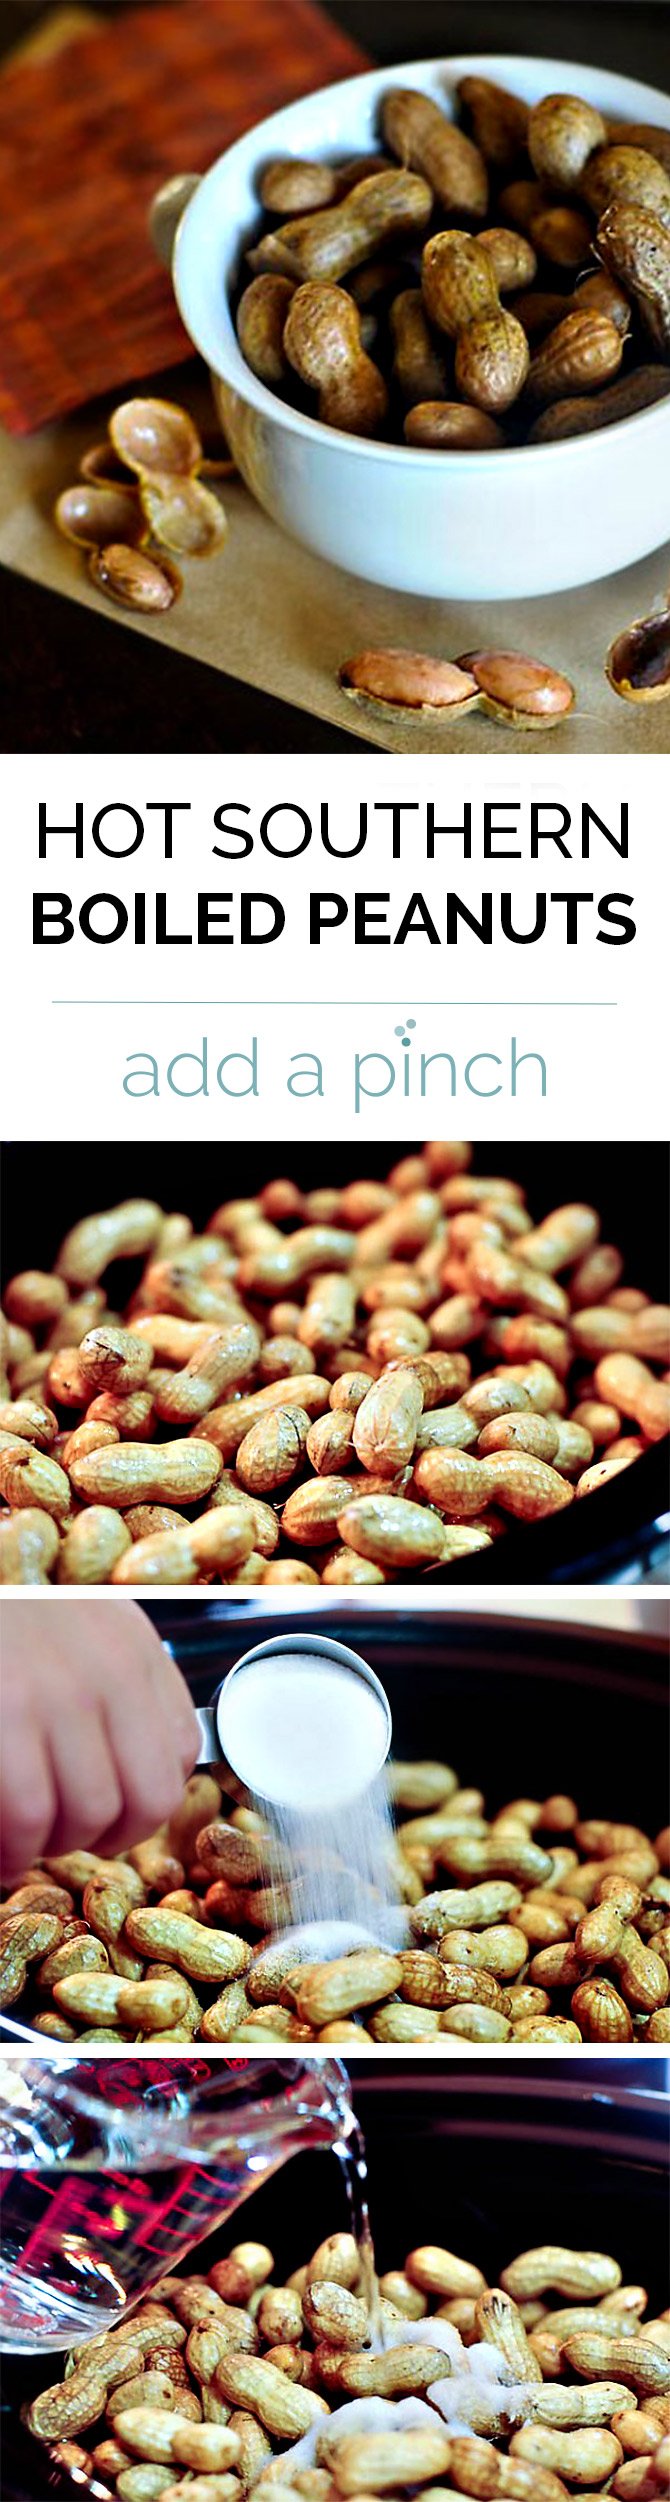 Hot Boiled Peanuts are a traditional Southern snack perfect for football games and fall drives! This easy version lets the slow cooker do all the hard work! // addapinch.com